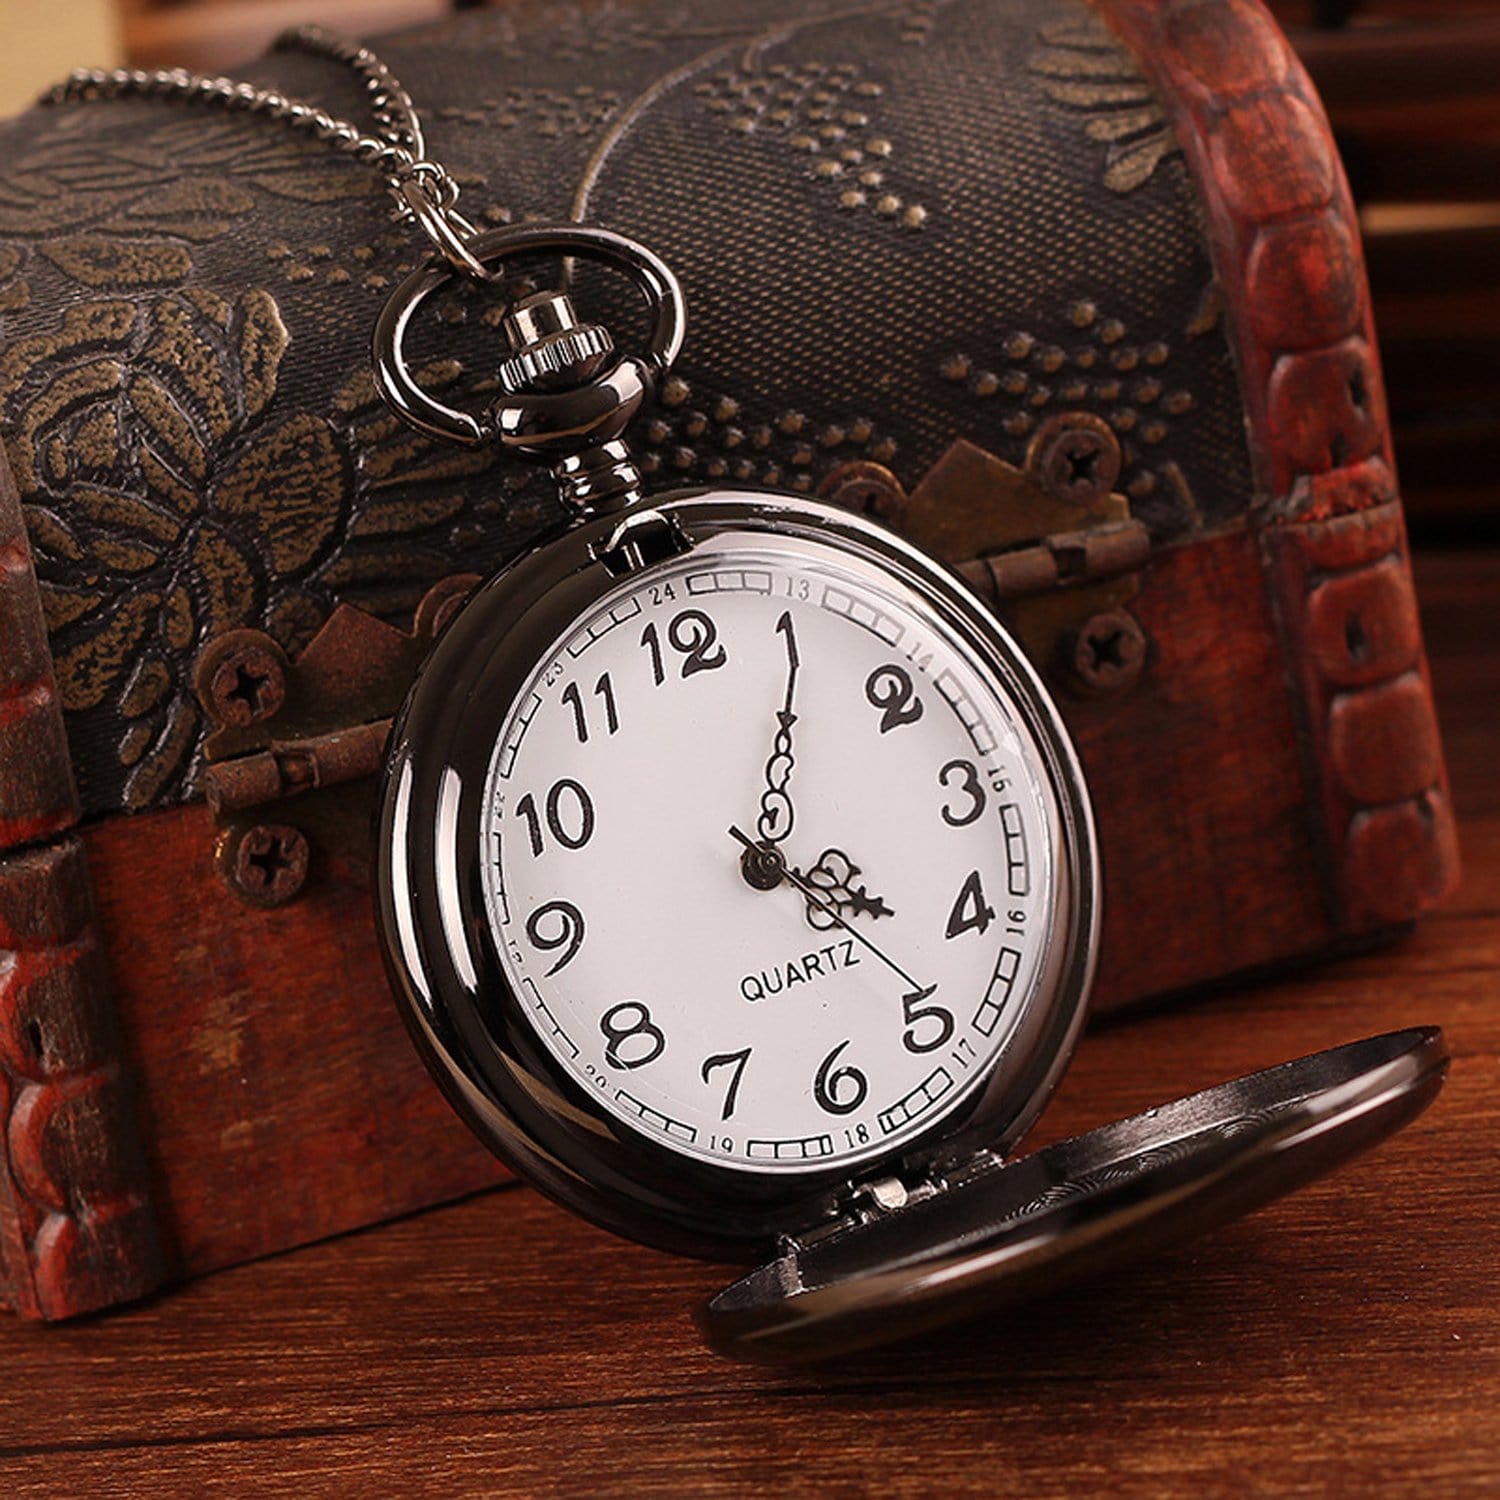 Pocket Watches To My Man - I Love You For All That You Are Pocket Watch GiveMe-Gifts